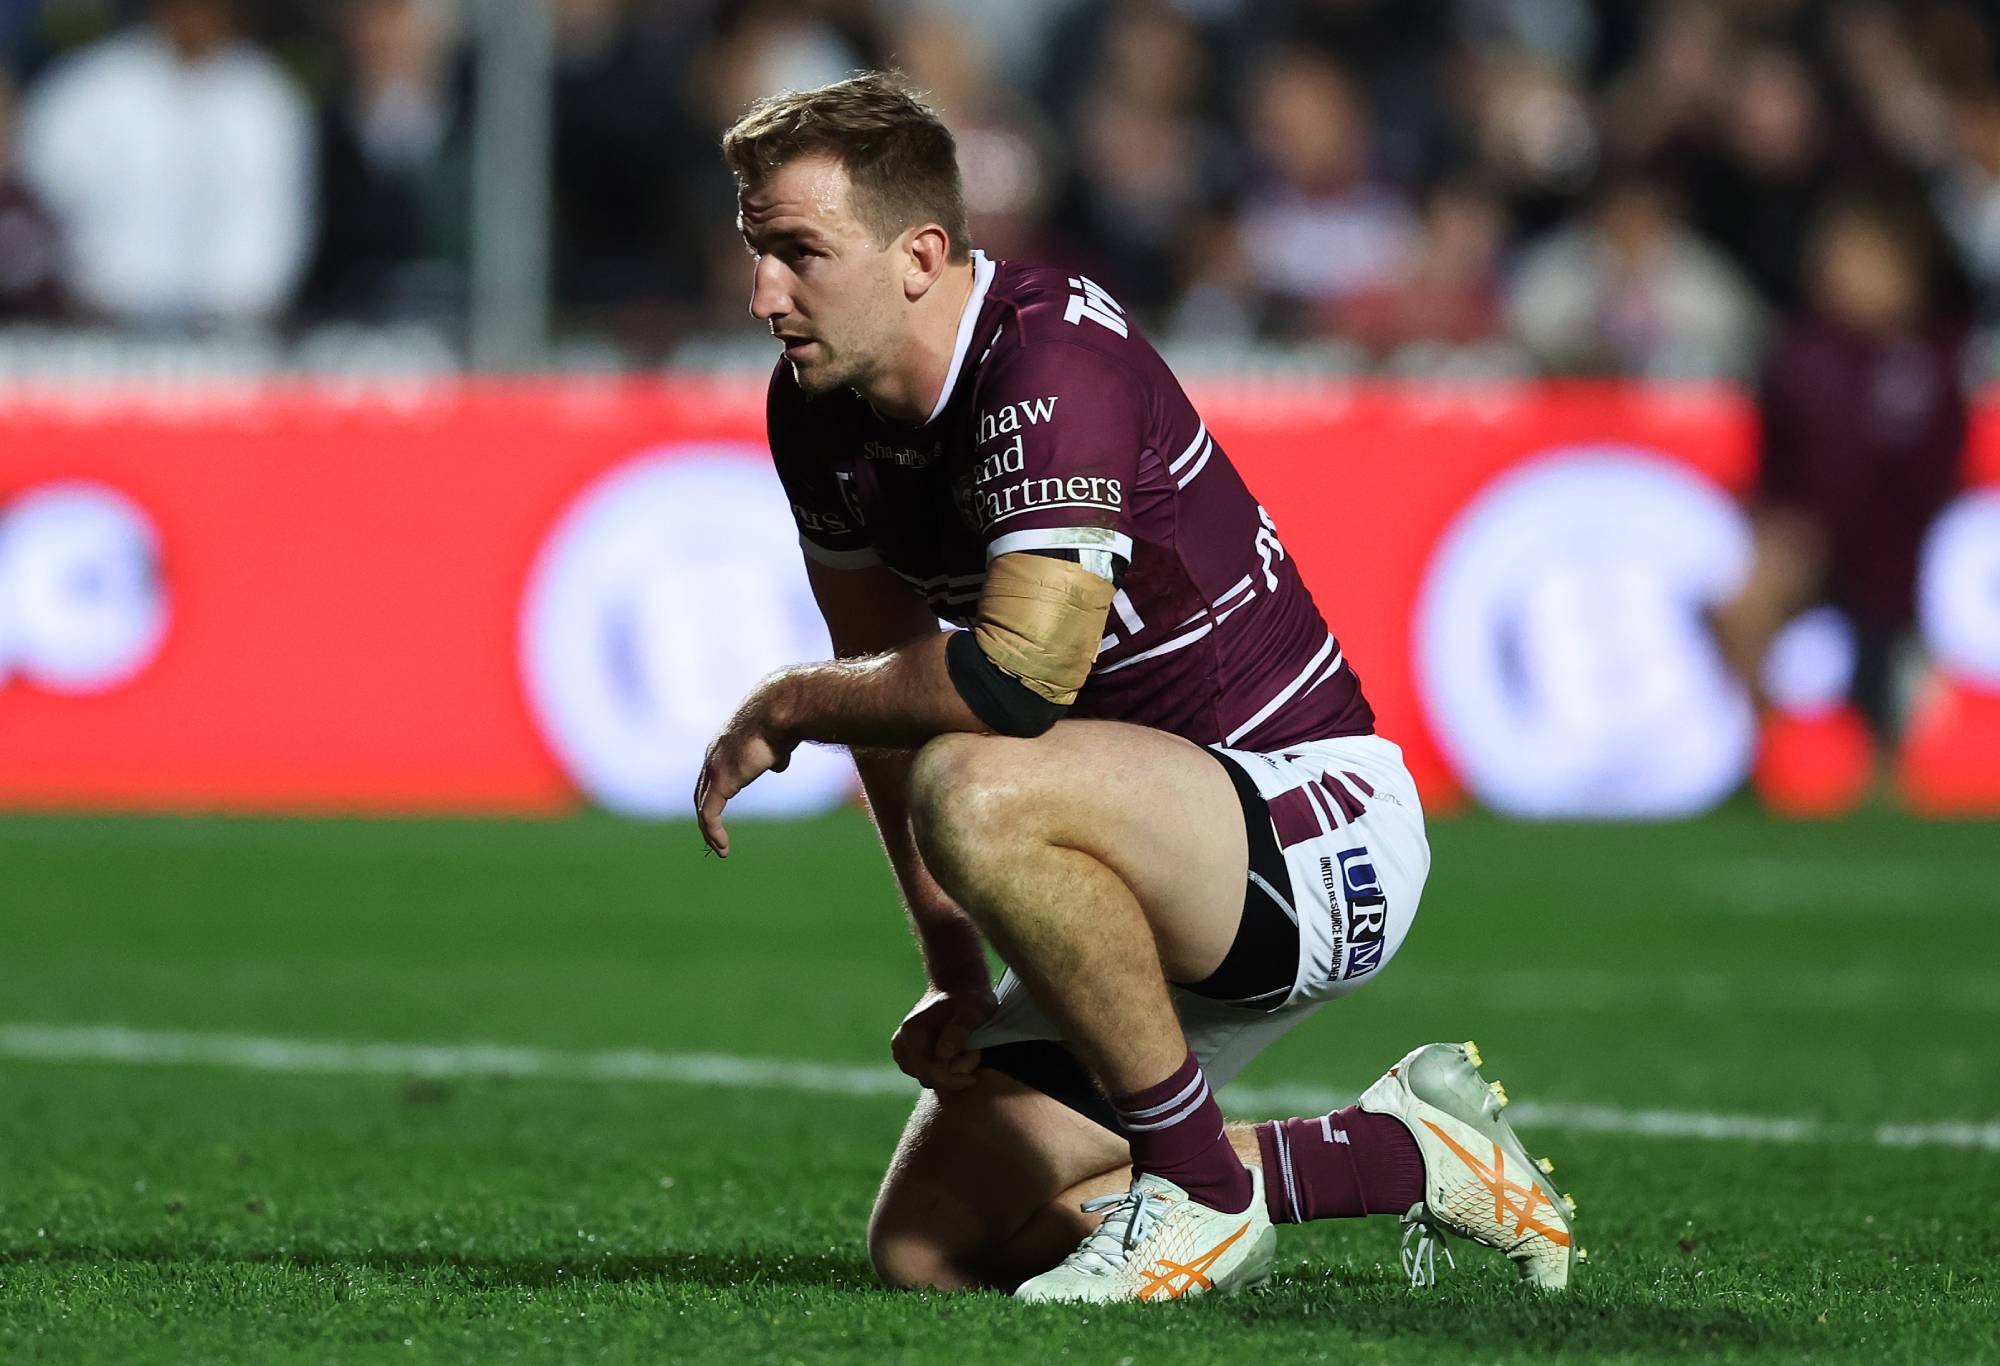 SYDNEY, AUSTRALIA - AUGUST 10: Lachlan Croker of the Sea Eagles reacts during the round 24 NRL match between Manly Sea Eagles and Penrith Panthers at 4 Pines Park on August 10, 2023 in Sydney, Australia. (Photo by Mark Metcalfe/Getty Images)